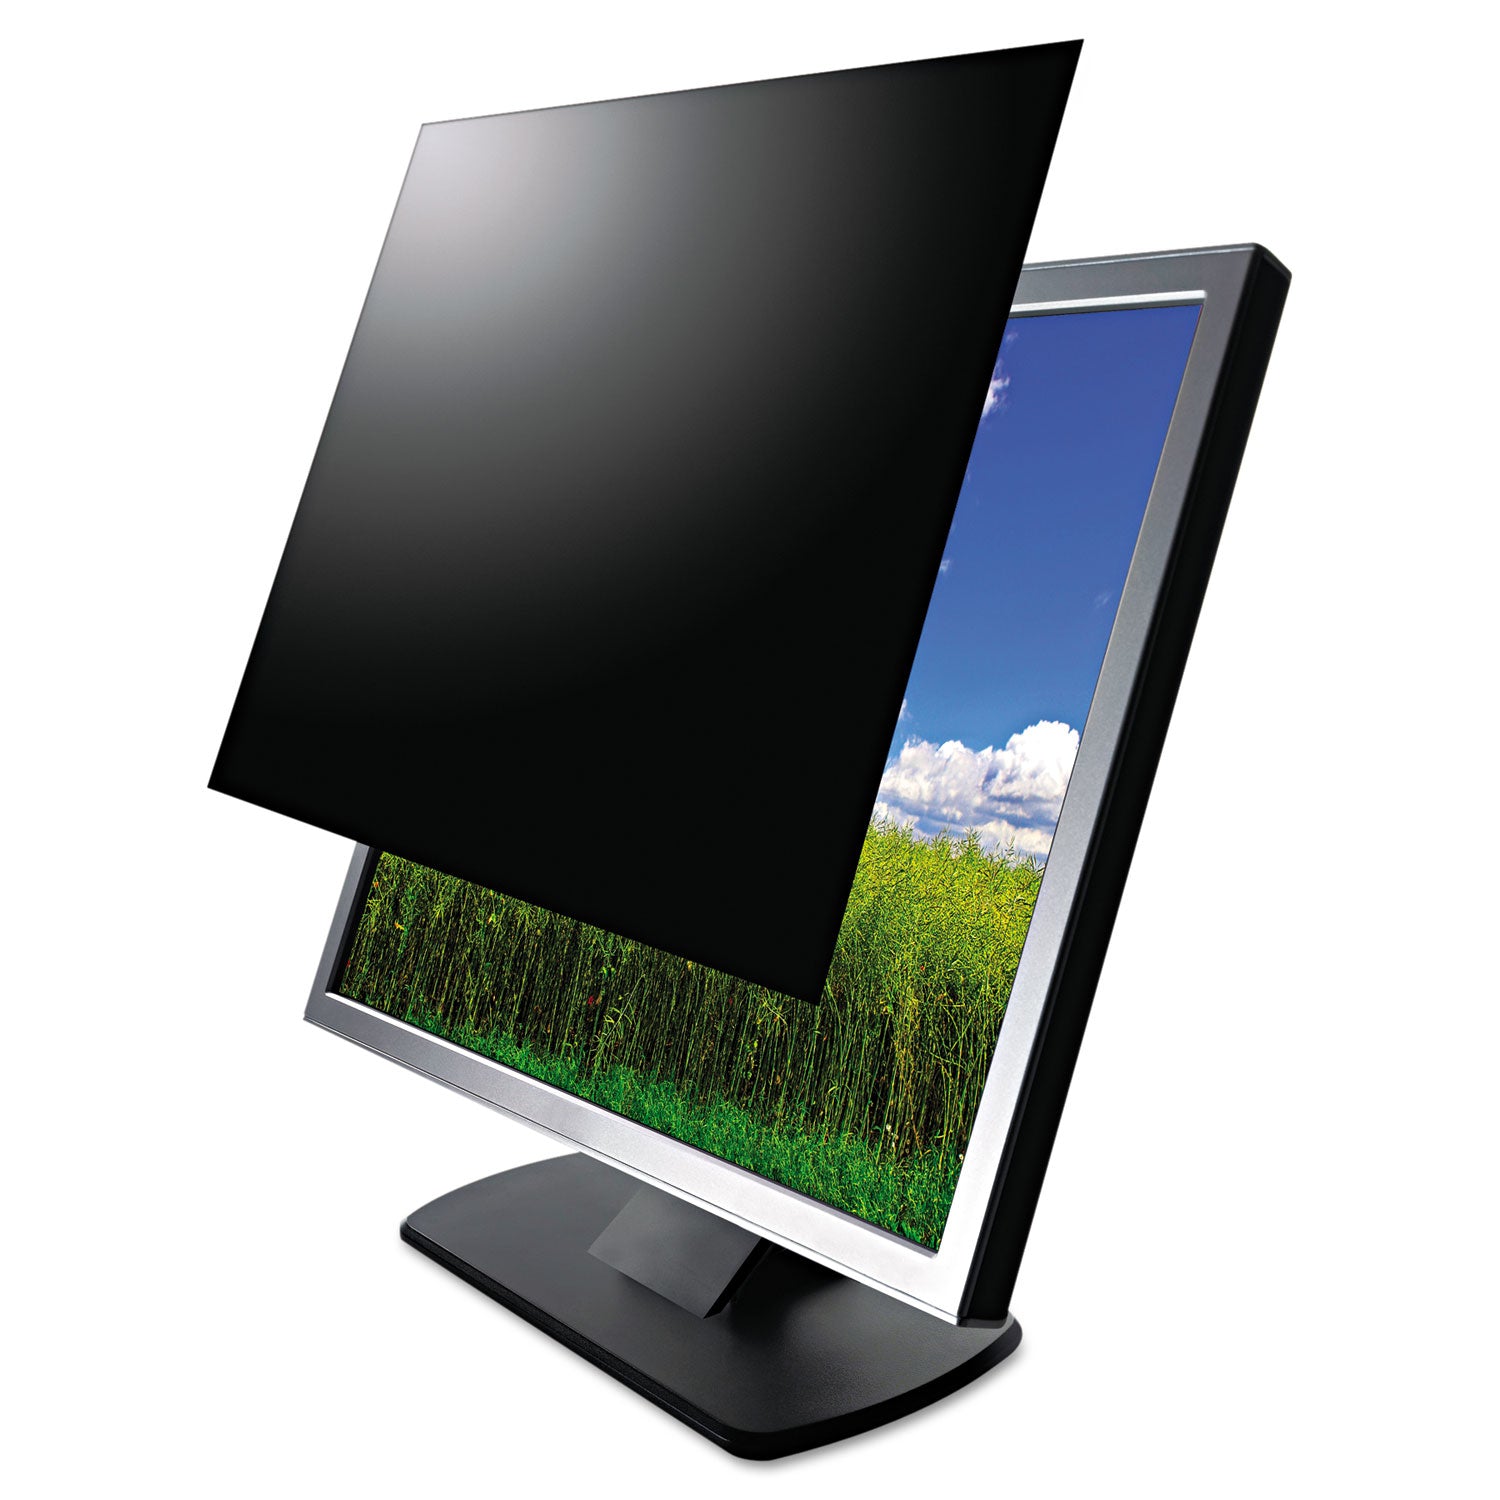 Secure View LCD Privacy Filter for 23" Widescreen Flat Panel Monitor, 16:9 Aspect Ratio - 